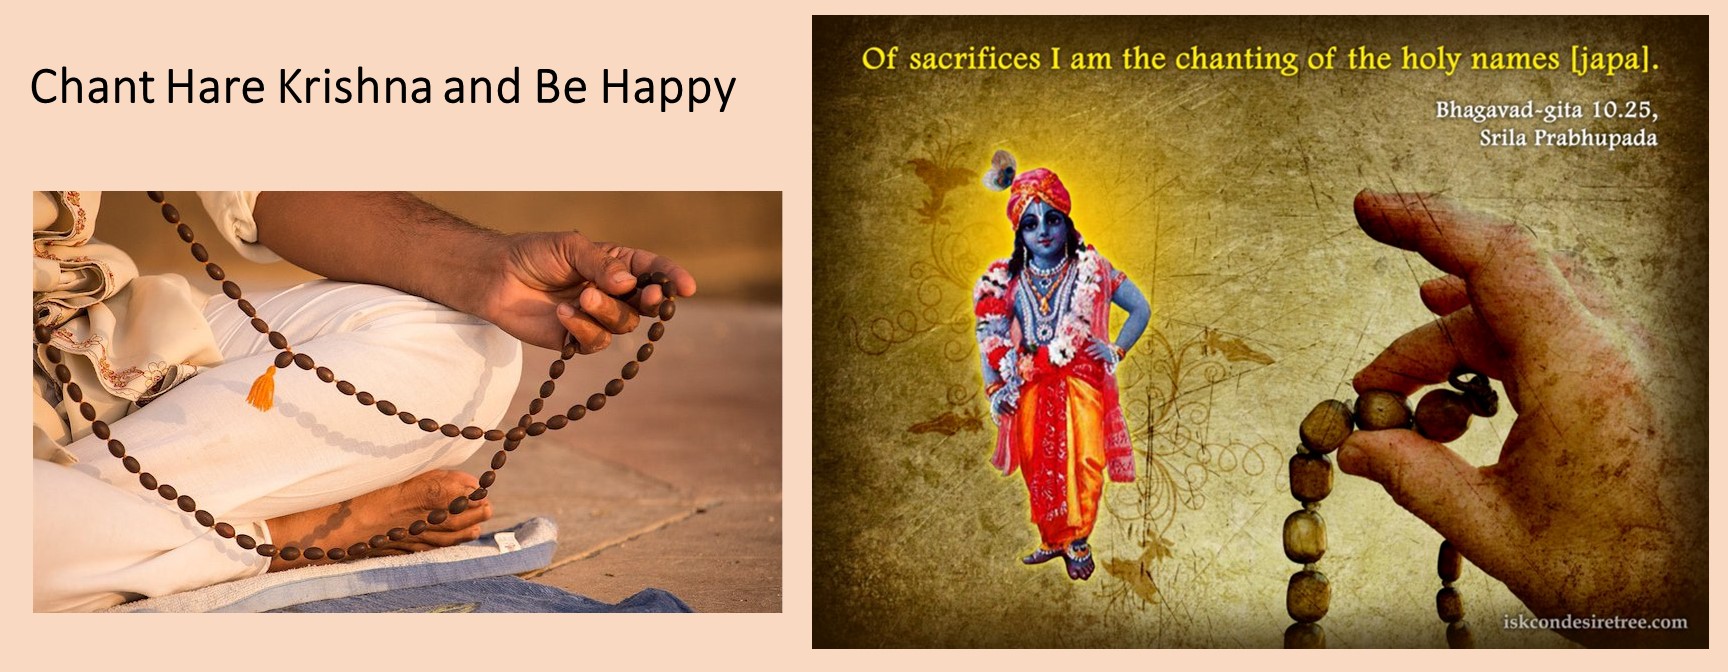 How to Chant on Beads? Chanting Hare Krishna mantra on beads 